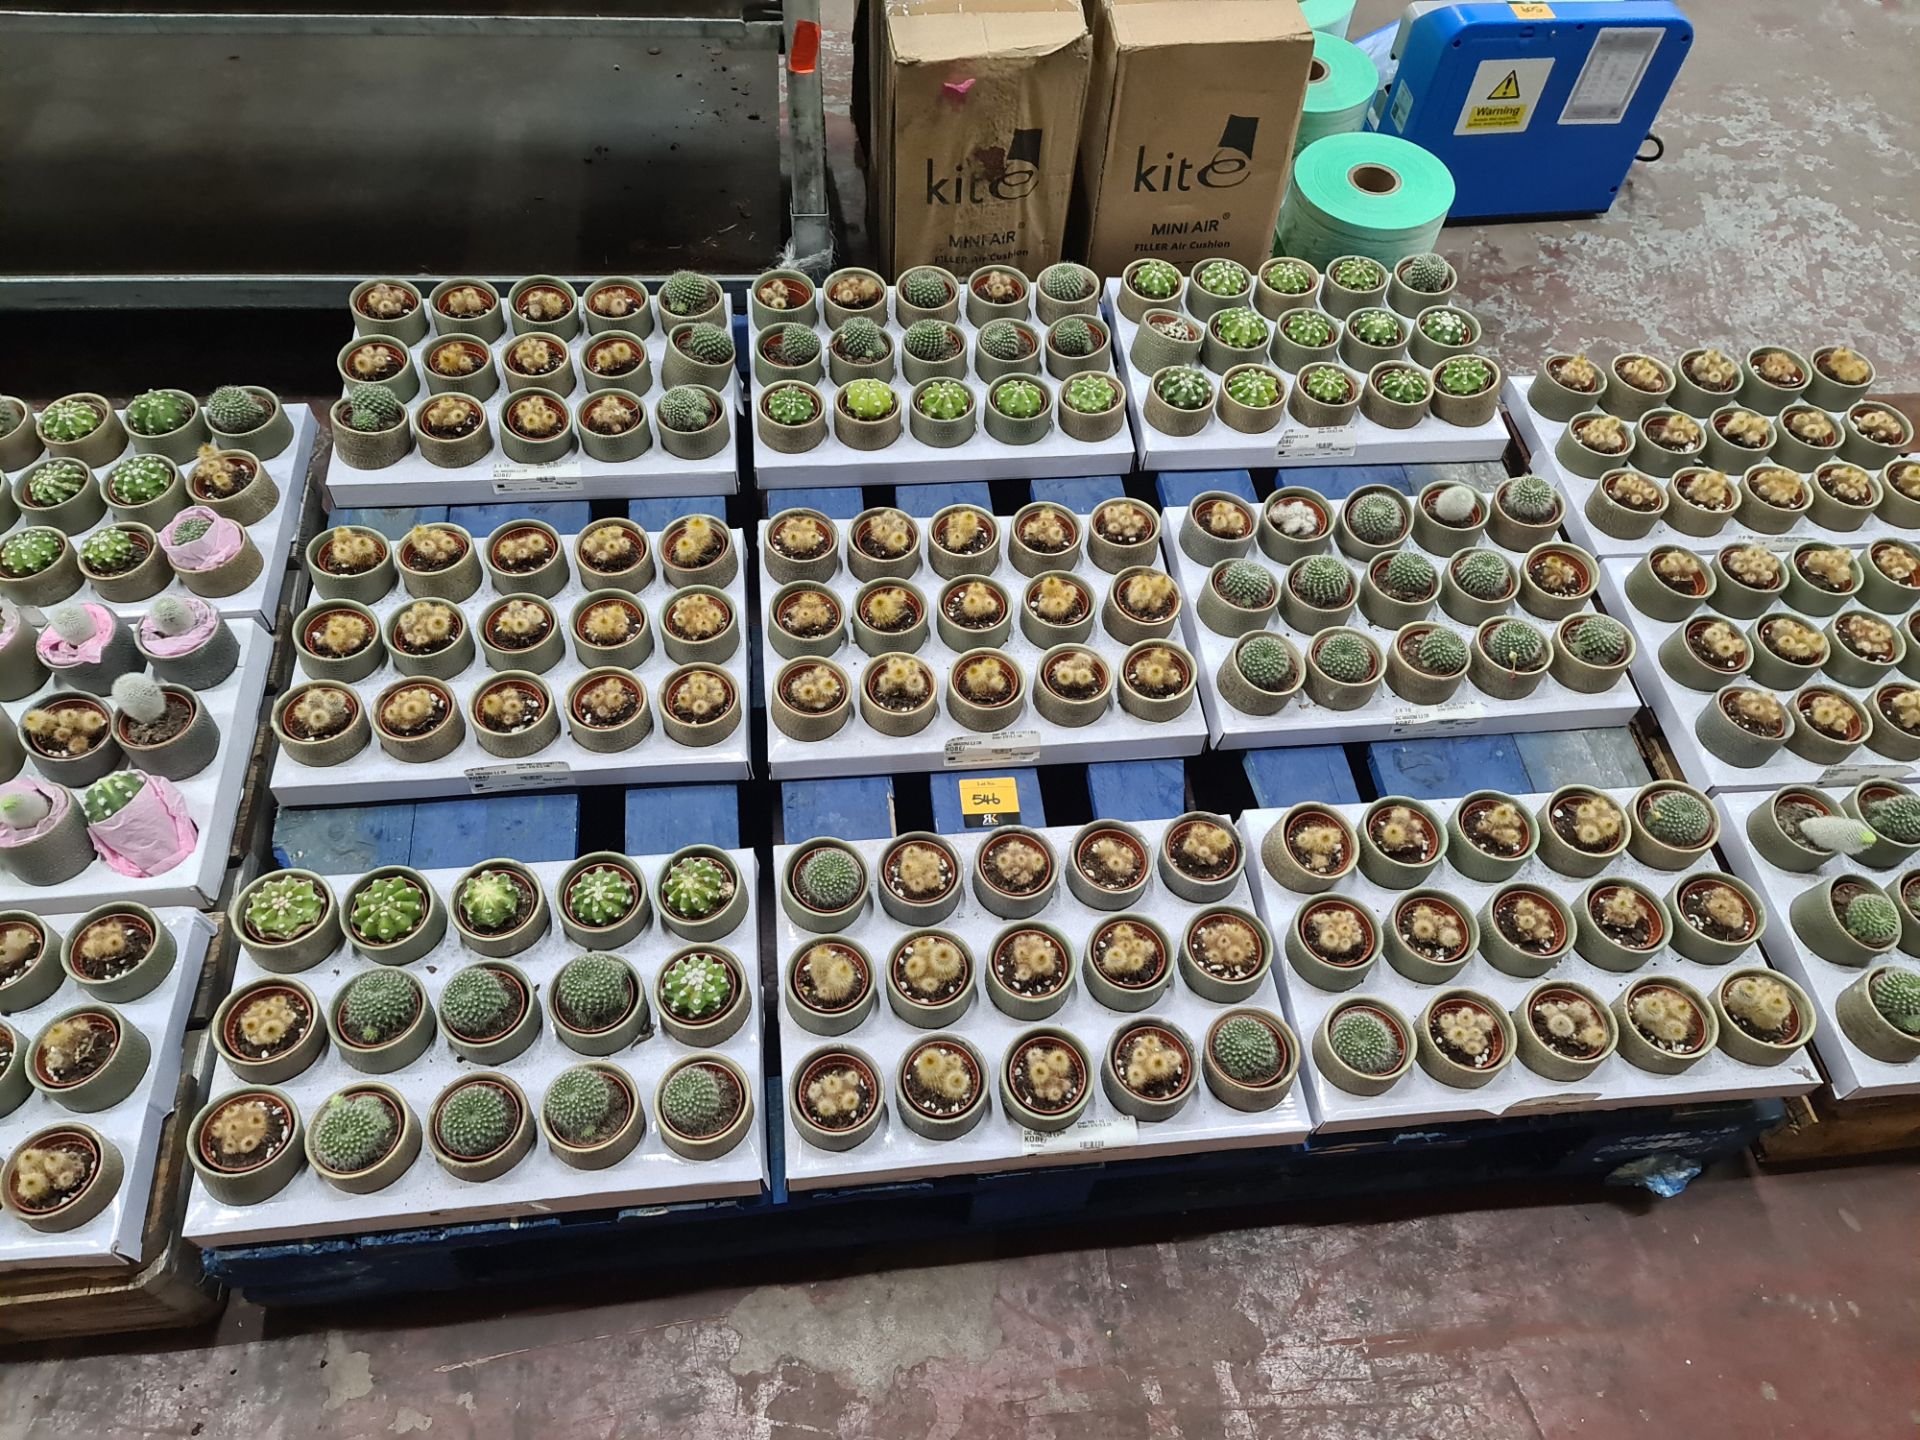 Contents of a pallet of small cacti and similar - this lot comprises 9 trays each with 15 plants - e